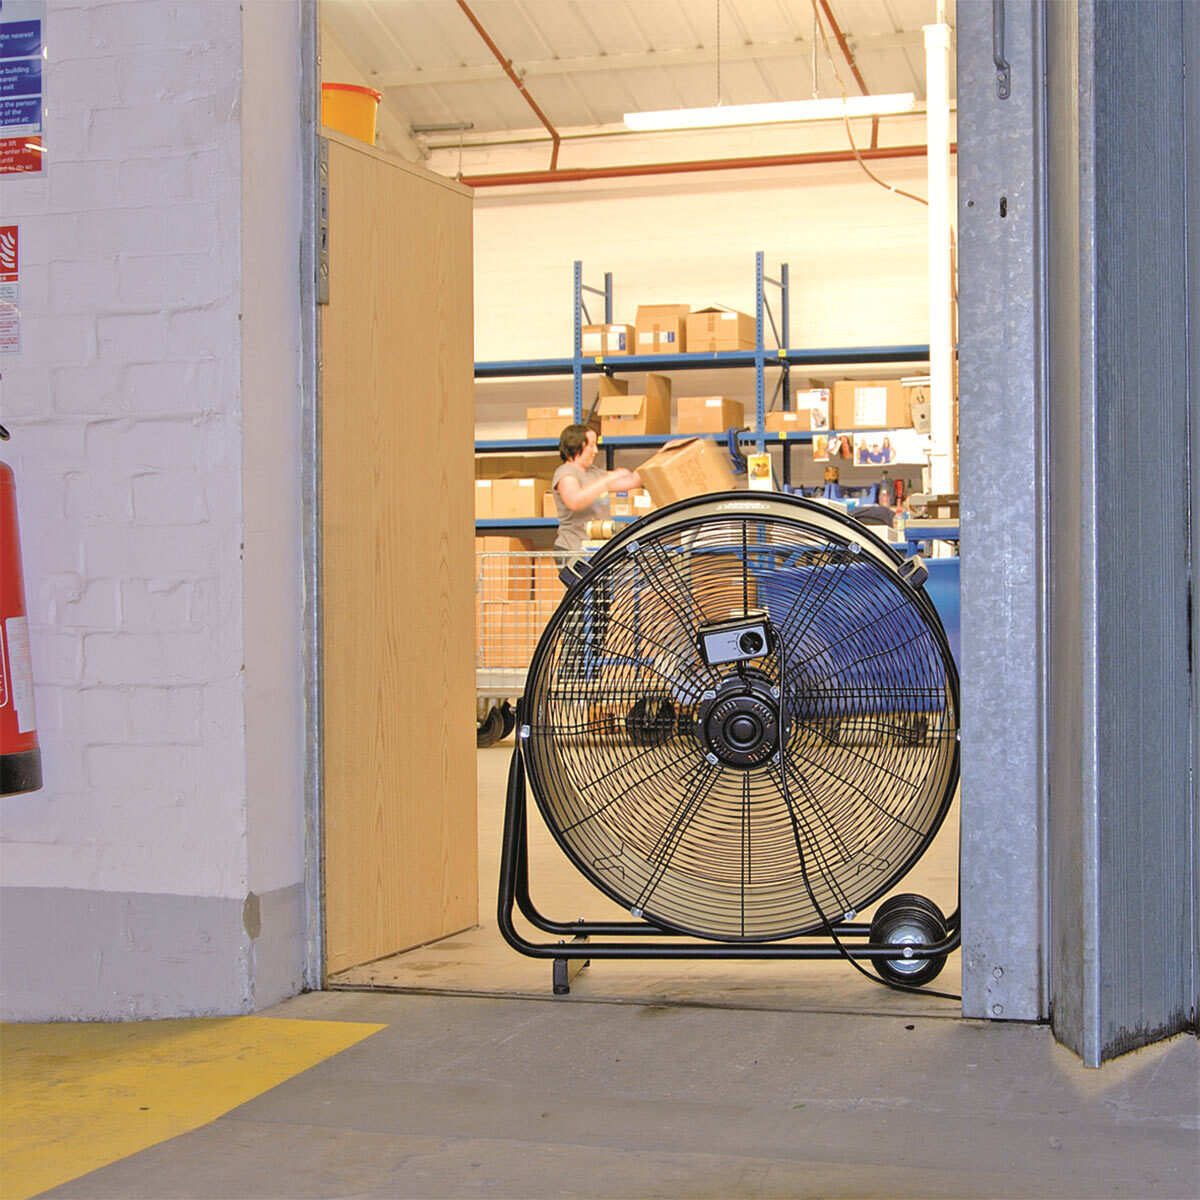 Lifestyle image of fan in industrial setting